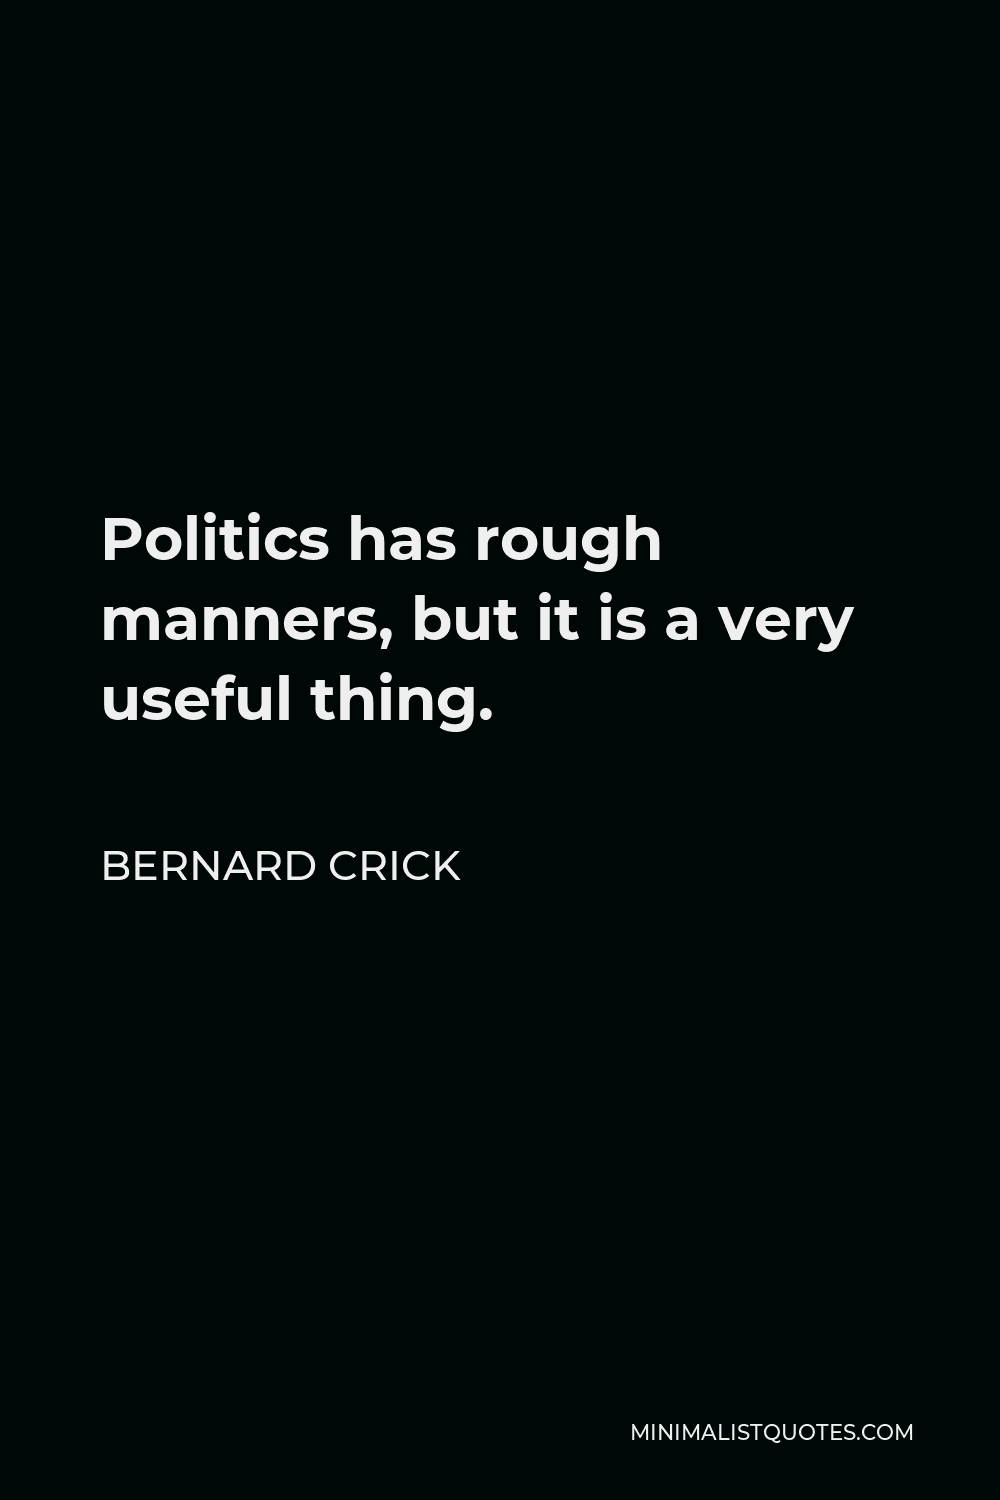 Bernard Crick Quote - Politics has rough manners, but it is a very useful thing.